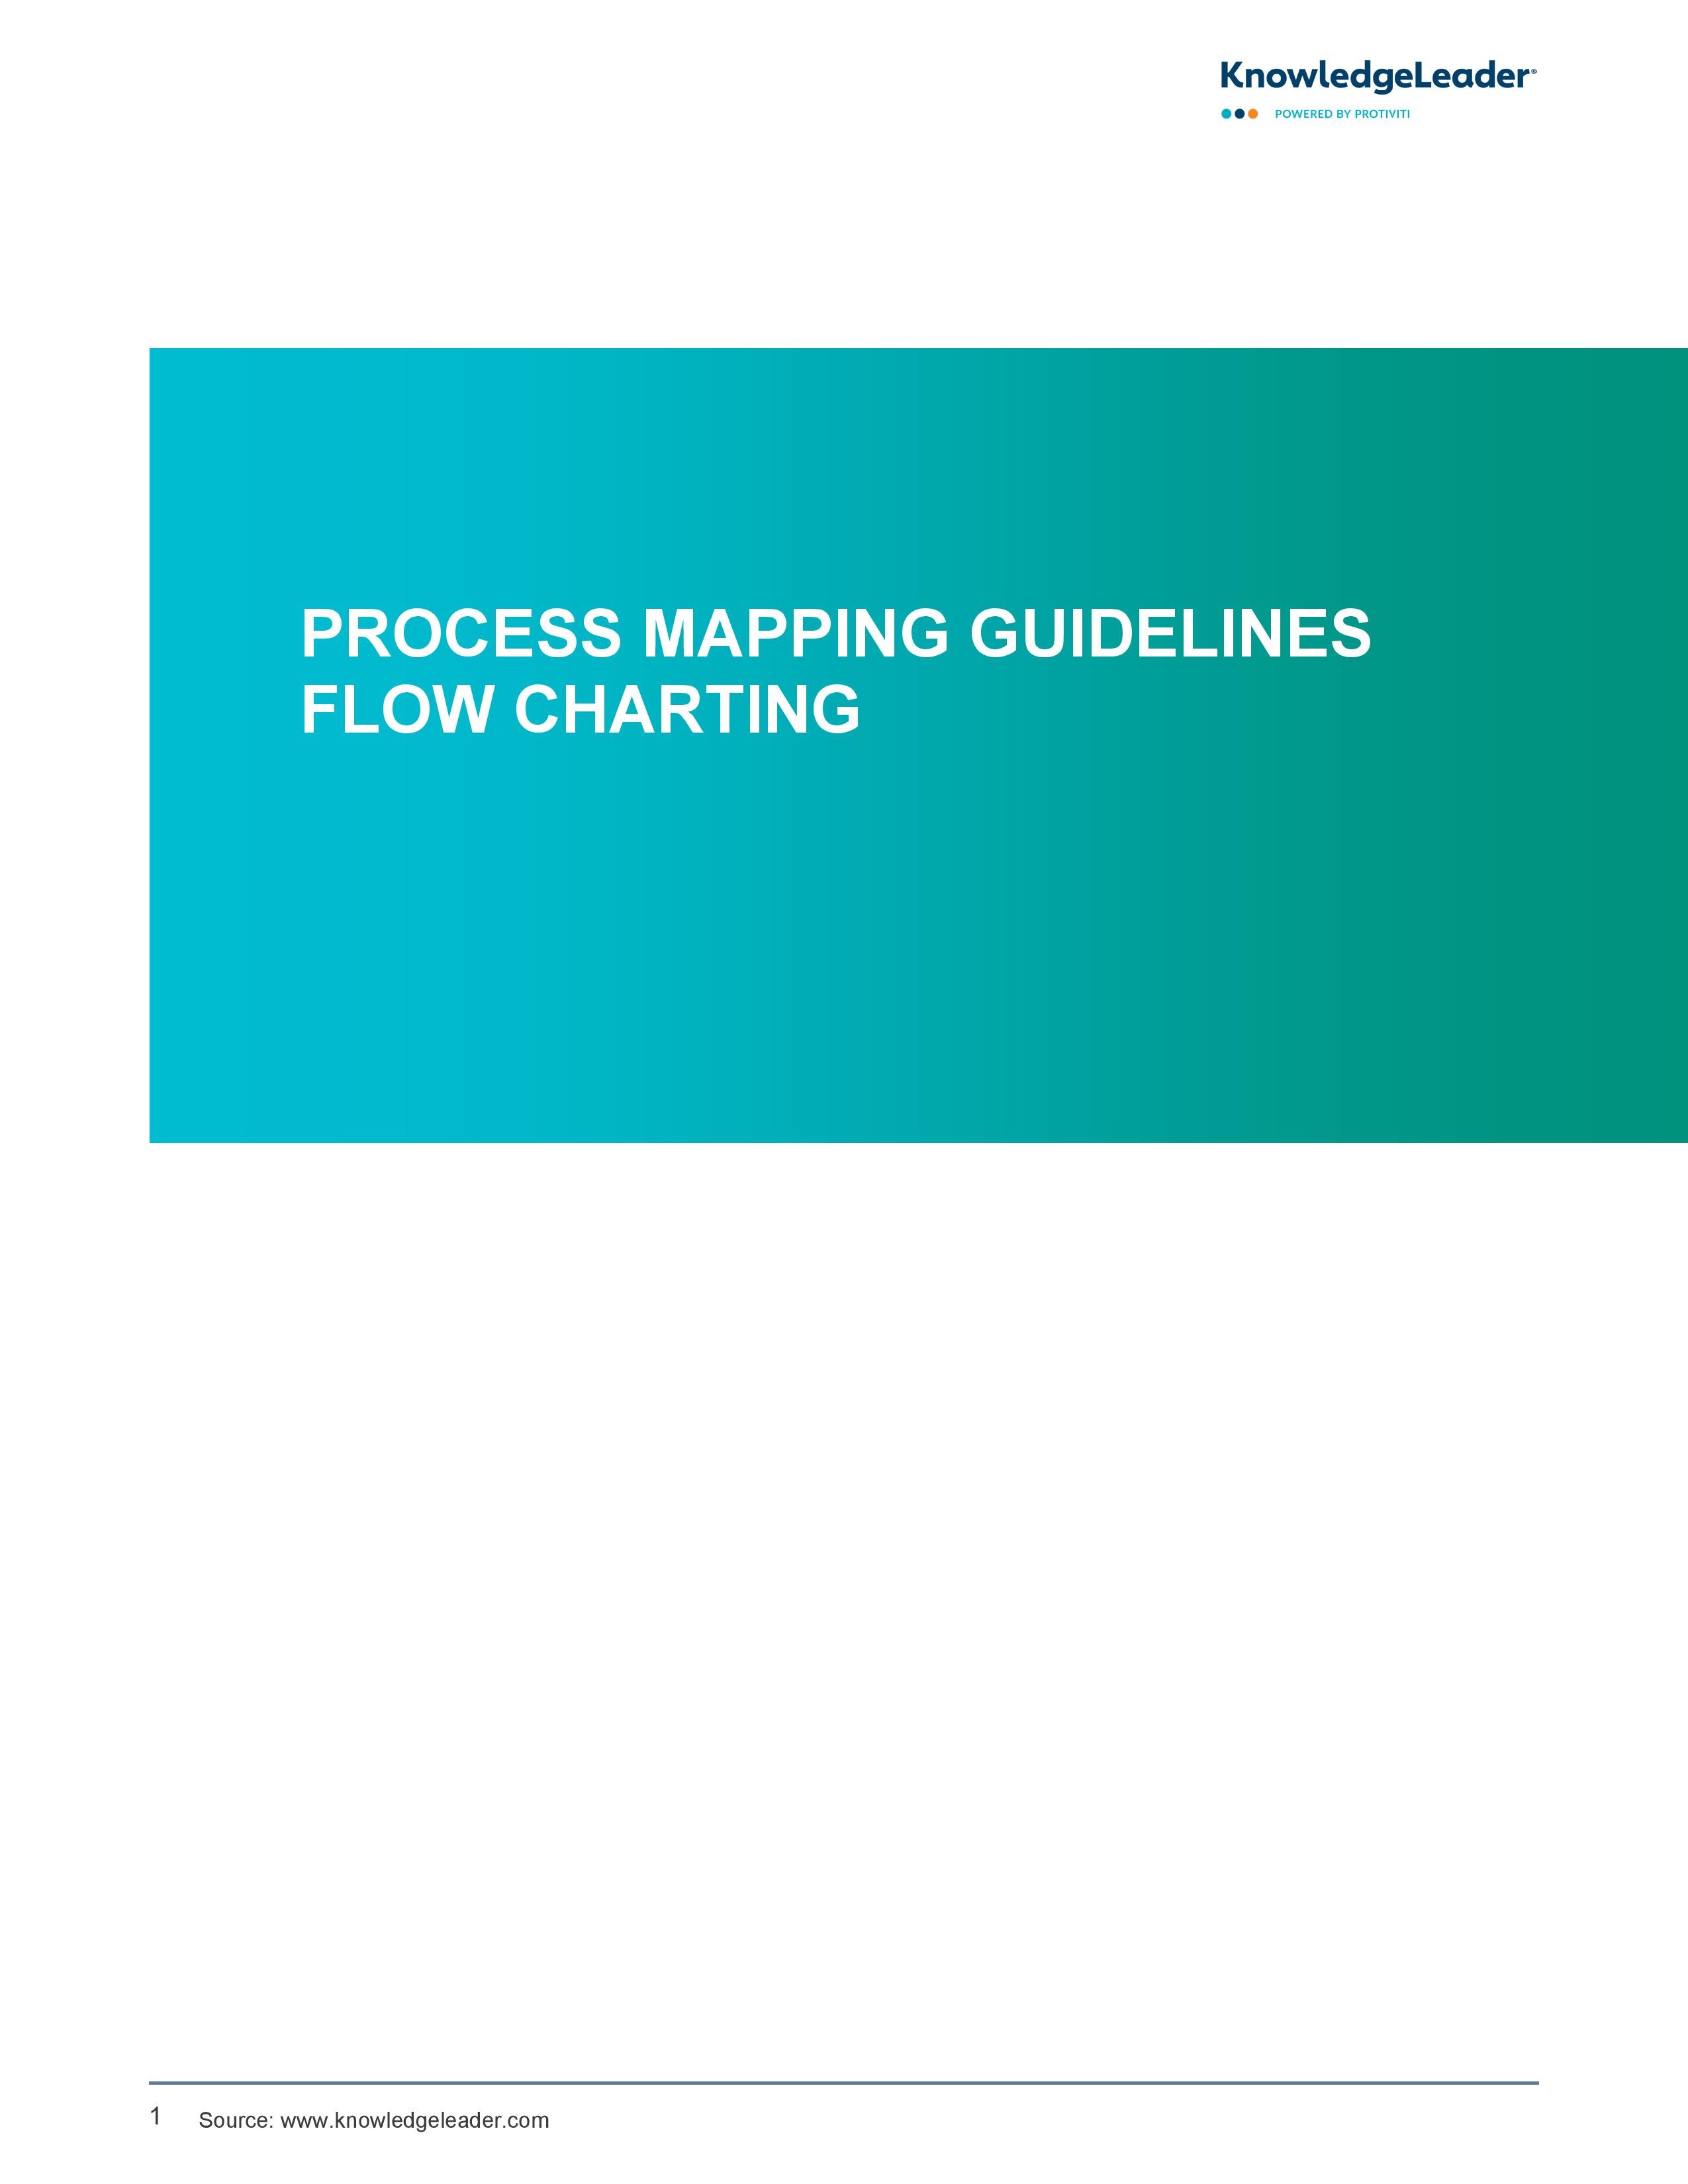 screenshot of the first page of Process Mapping Guidelines Flow Charting